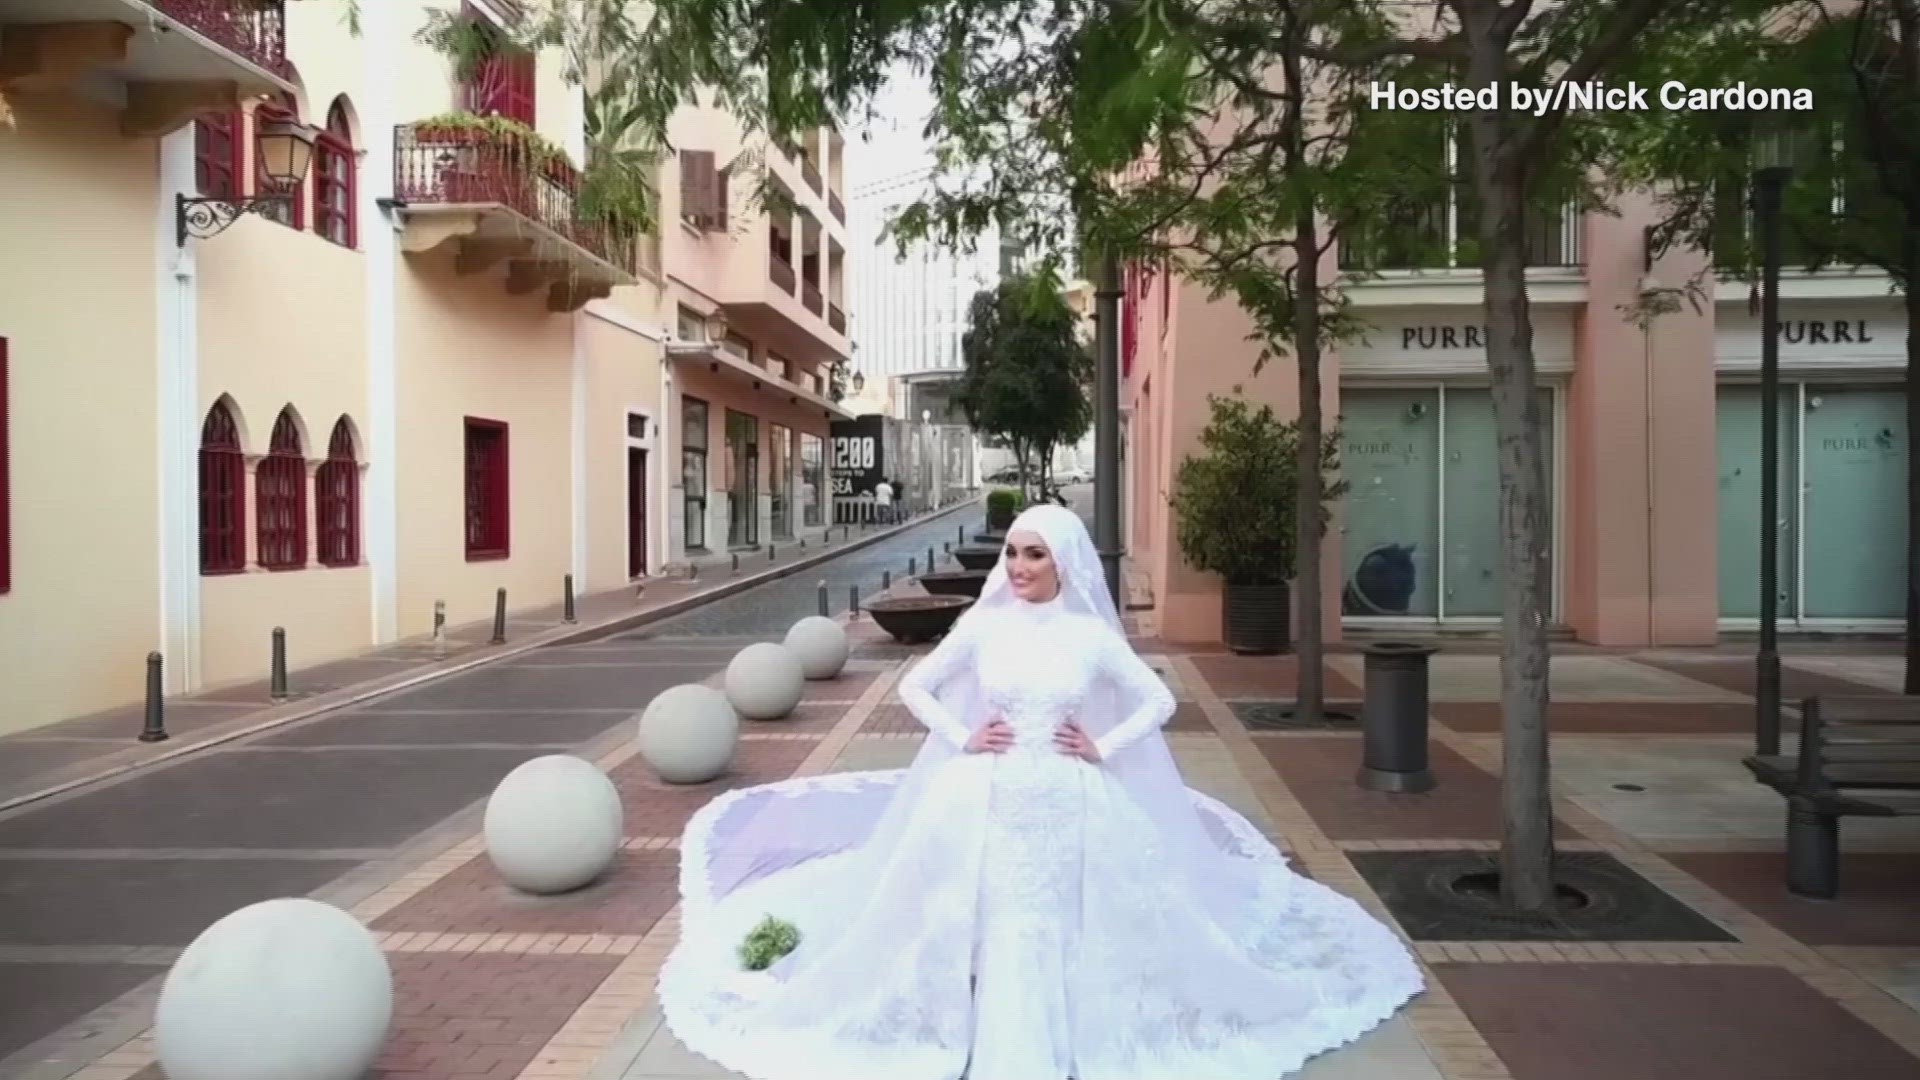 Footage shows the woman holding her bouquet in a square in Lebanon on the day of her wedding.